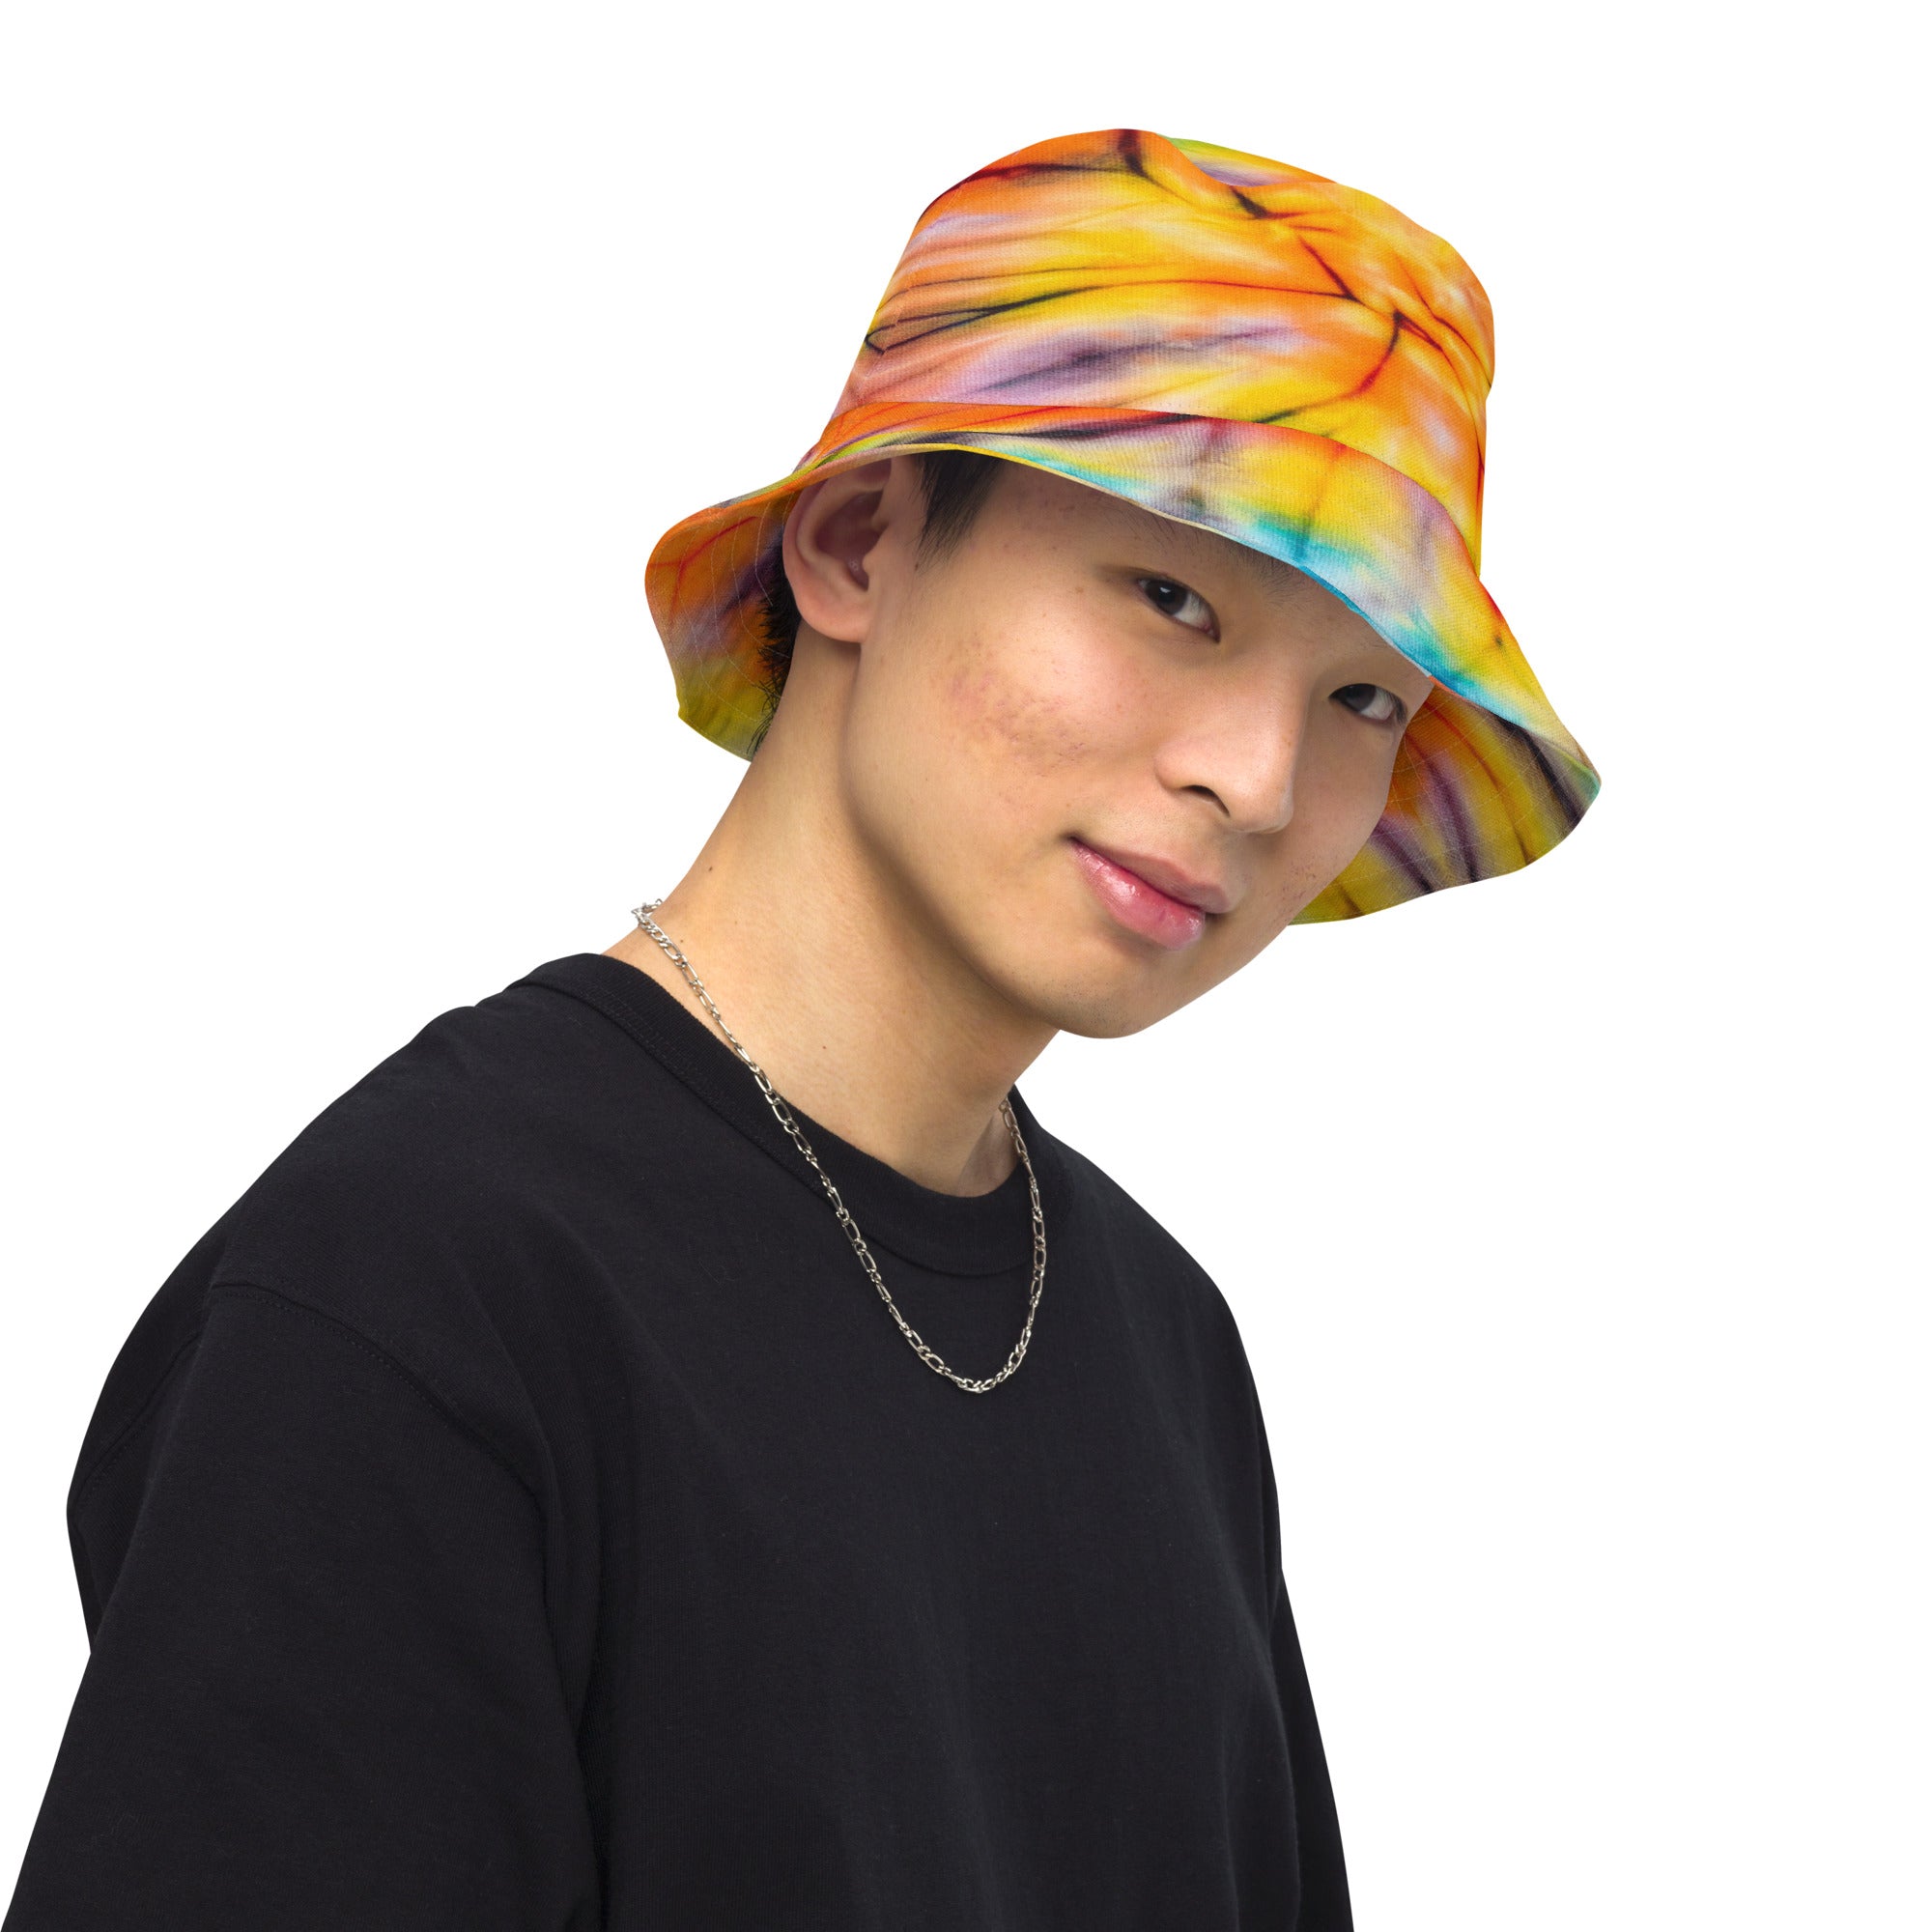 "Splash of Color: Dive into Style with Our Tie Dye Bucket Hat", lioness-love